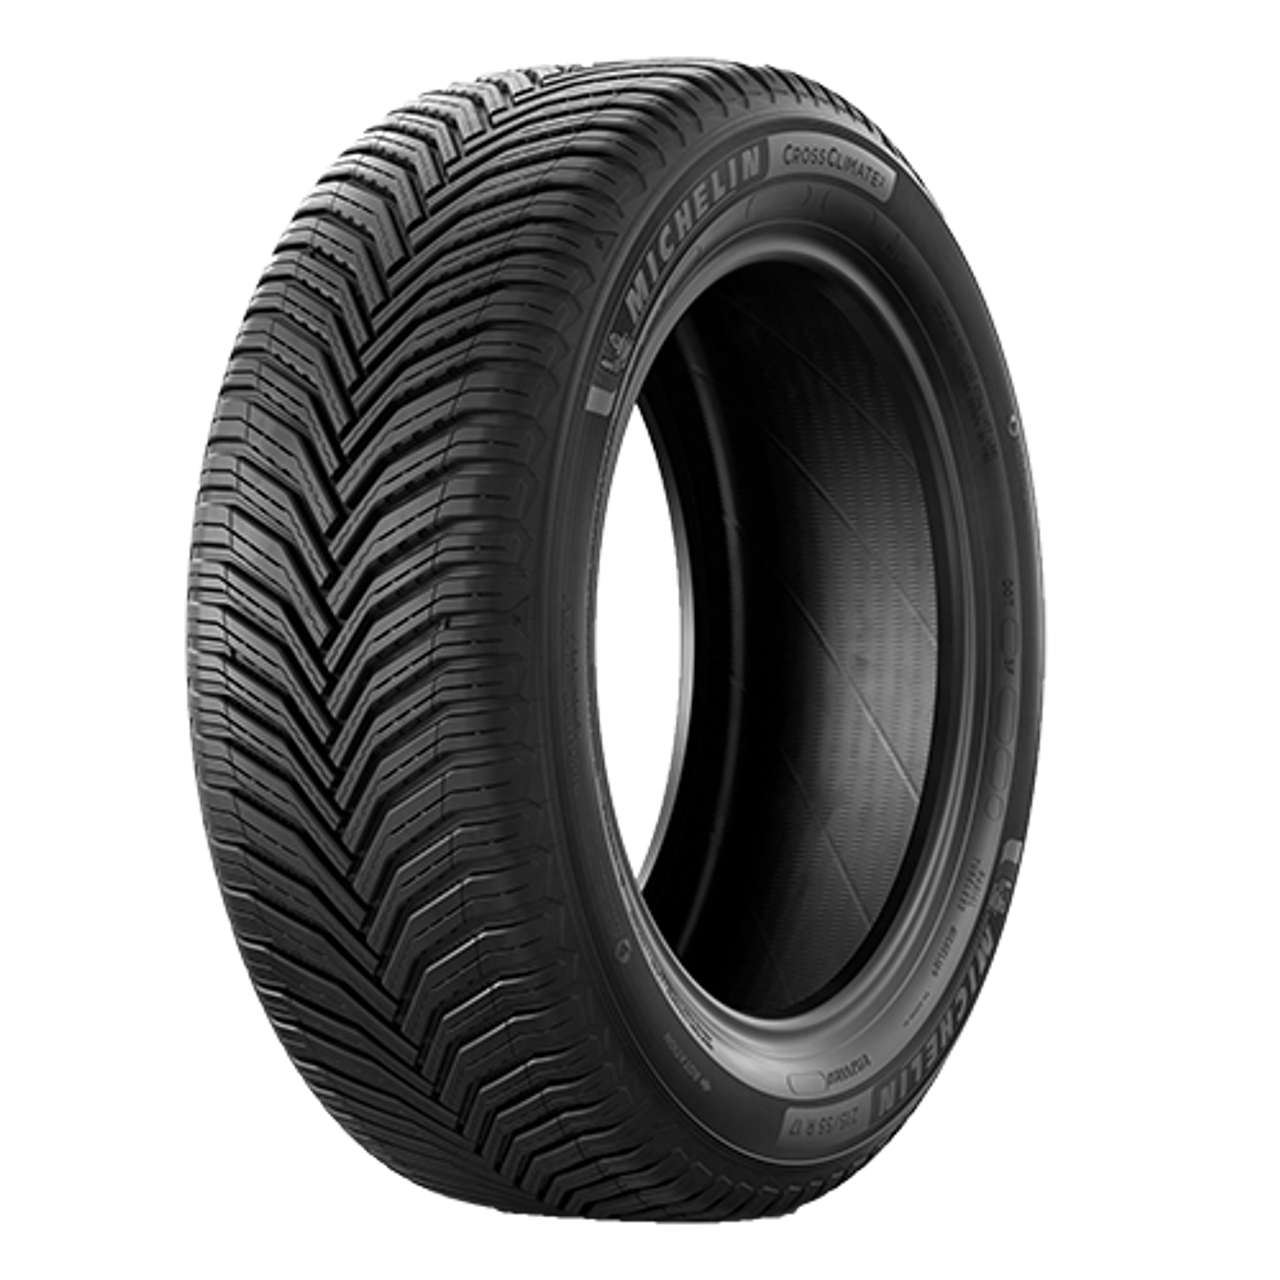 MICHELIN CROSSCLIMATE 2 215/55R18 95H BSW